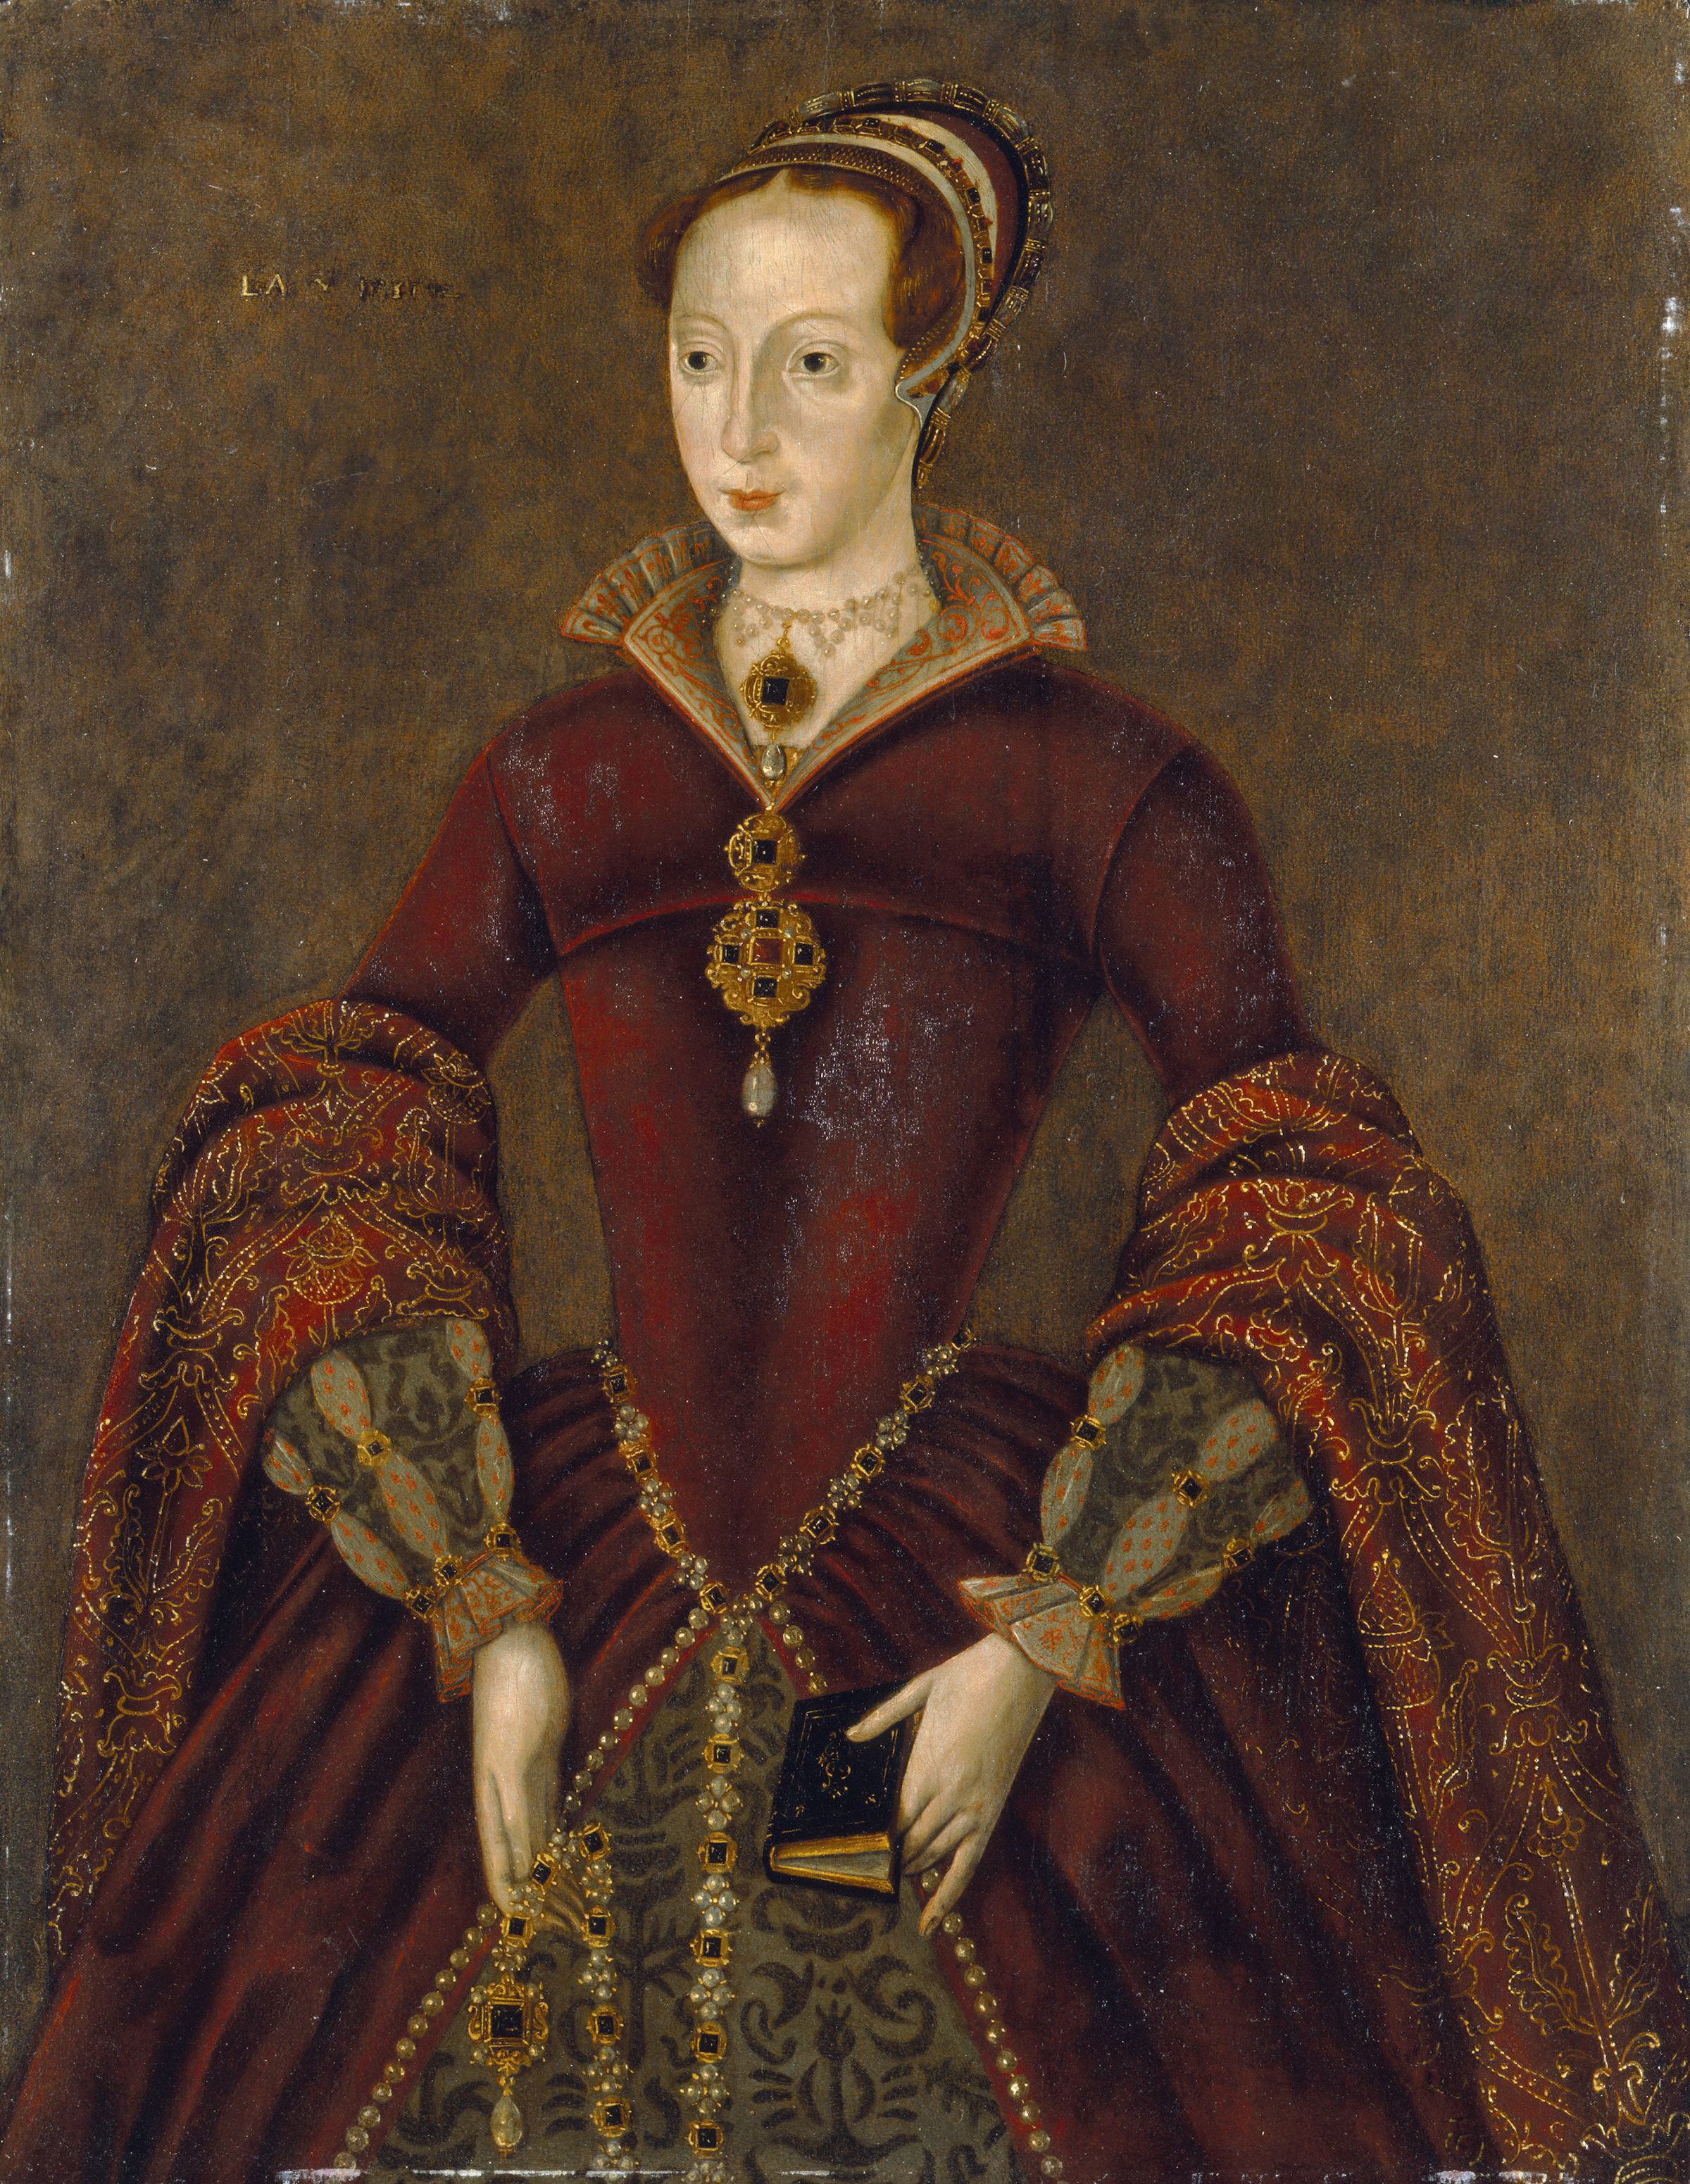 Lady Jane Grey, the Nine Days'Queen was Queen of England and Ireland from 10 July until 19 July 1553.